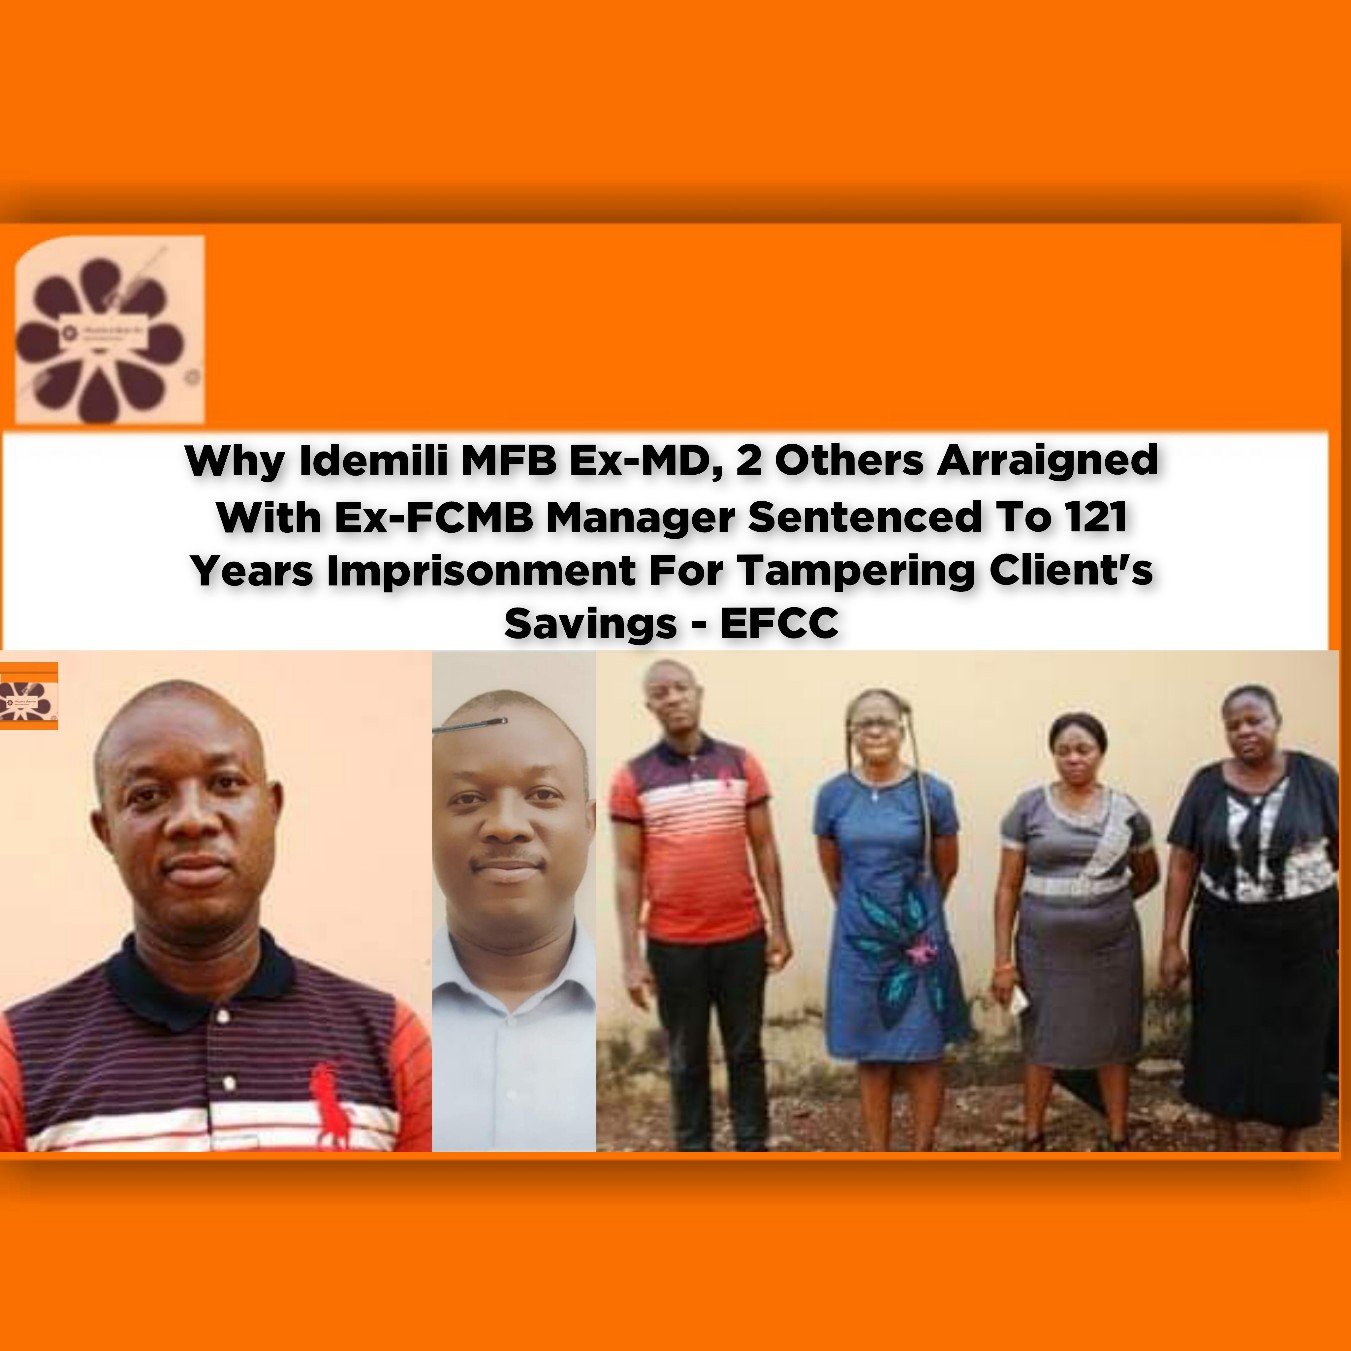 Why Idemili MFB Ex-MD, 2 Others Arraigned With Ex-FCMB Manager Sentenced To 121 Years Imprisonment For Tampering Client's Savings - EFCC ~ OsazuwaAkonedo ###KolaEdokpayi